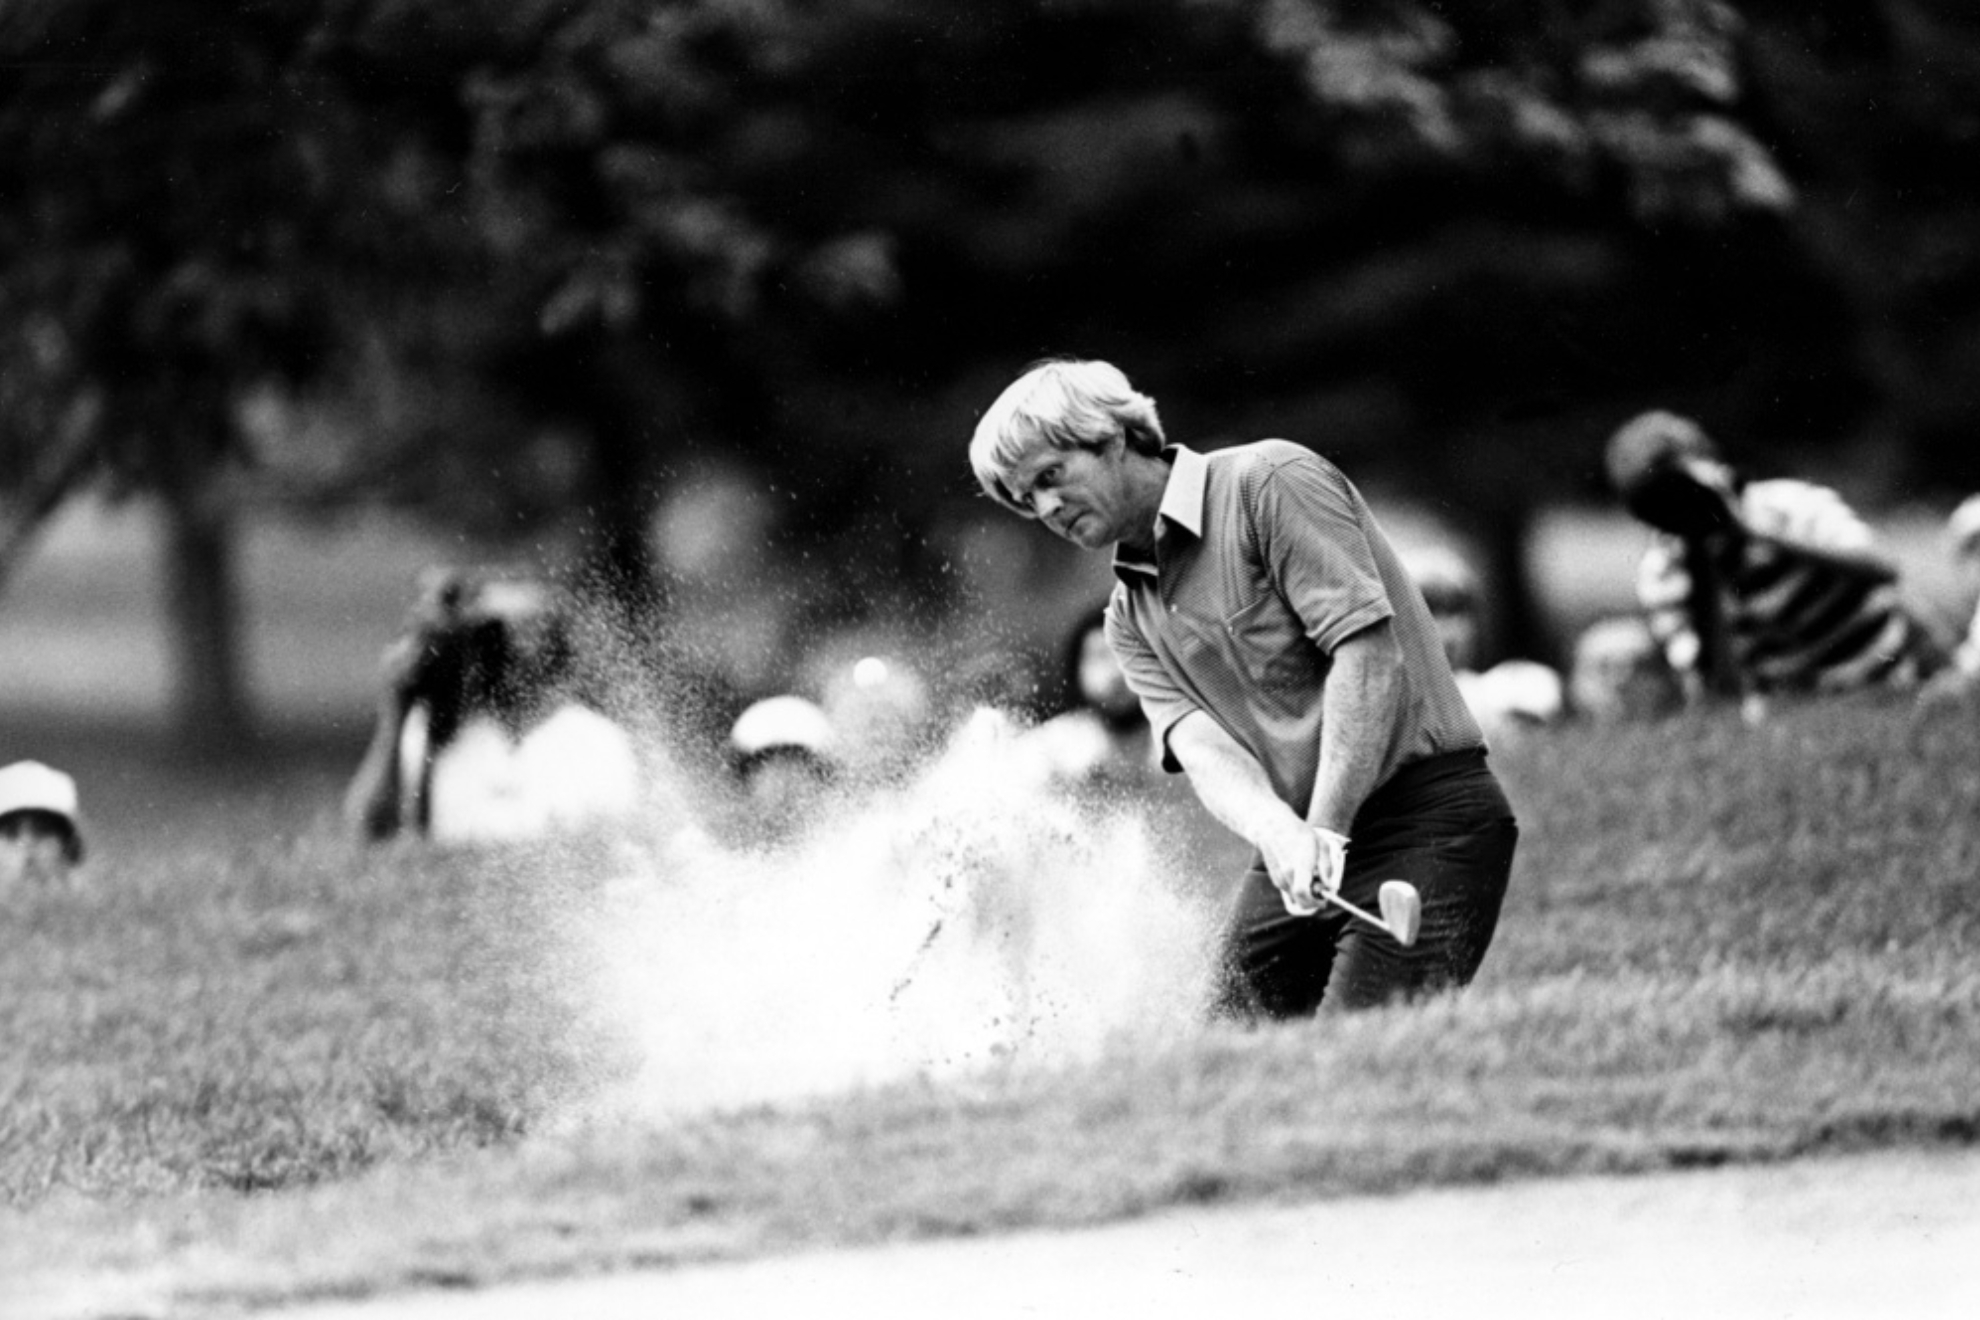 Jack Nicklaus is often regarded as a golfing legend